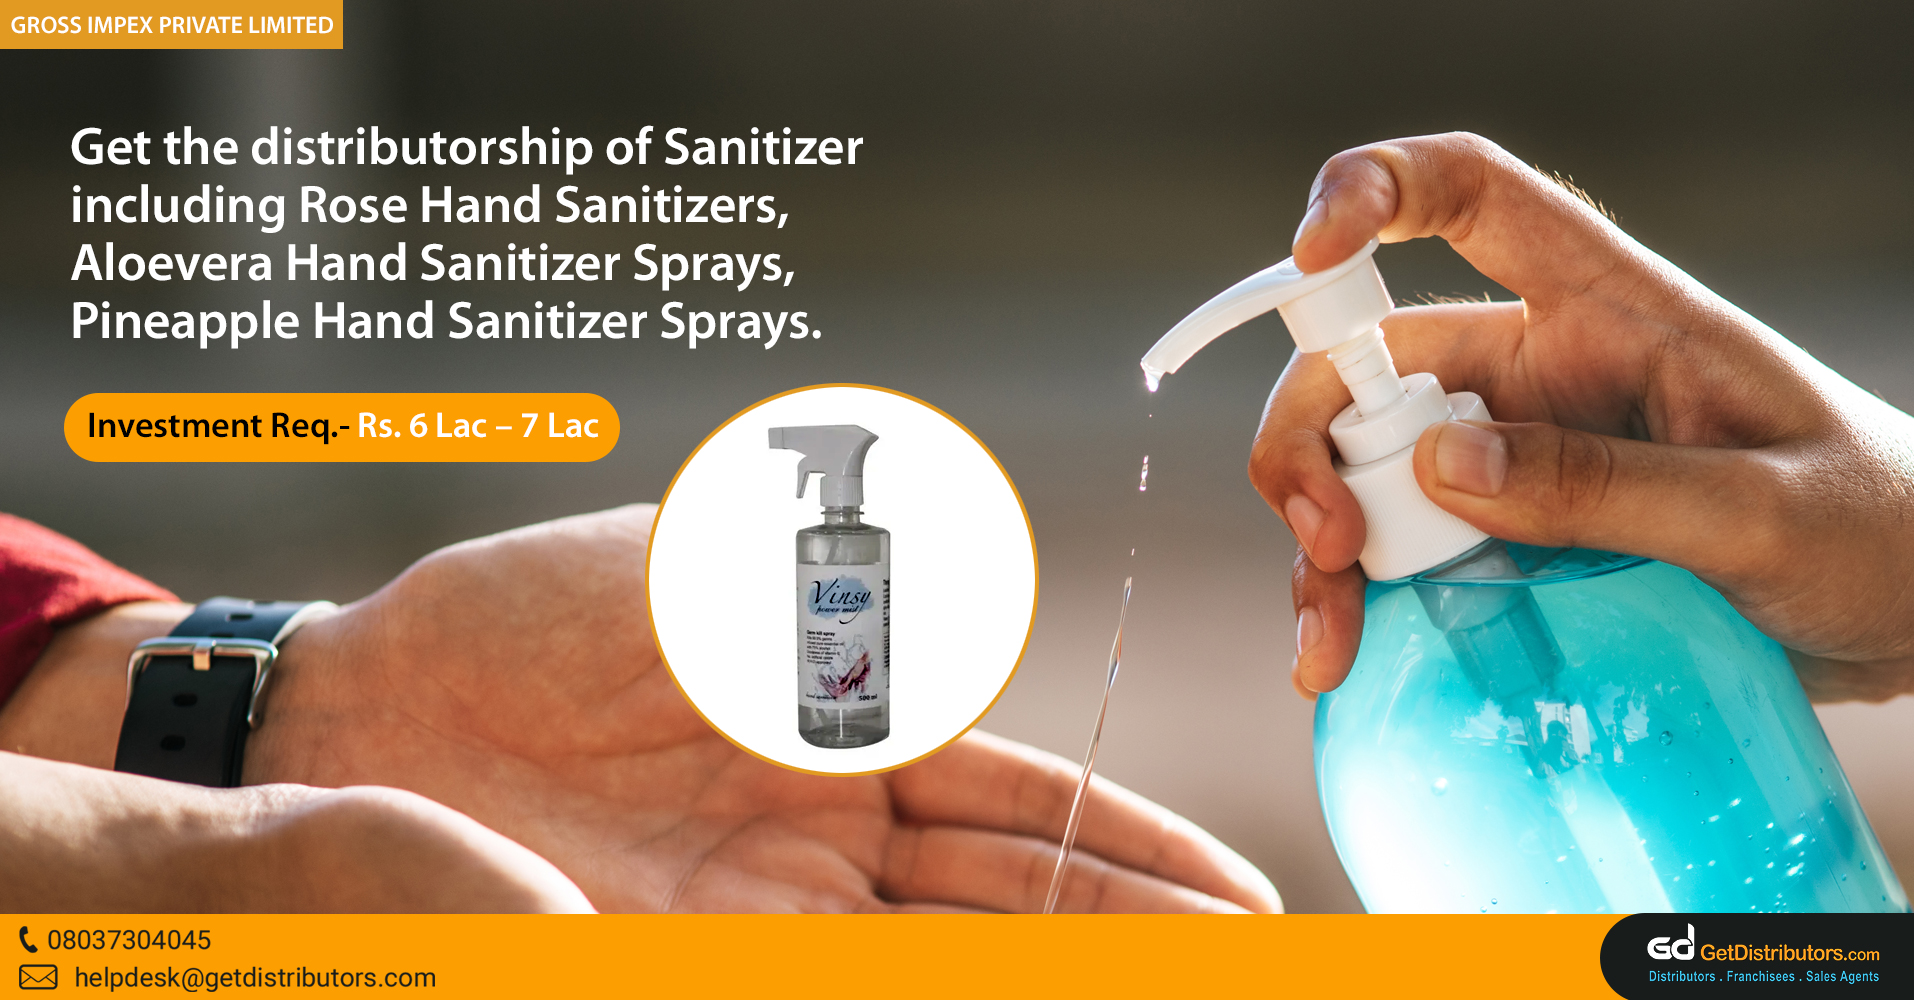 High-quality sanitizers for distribution